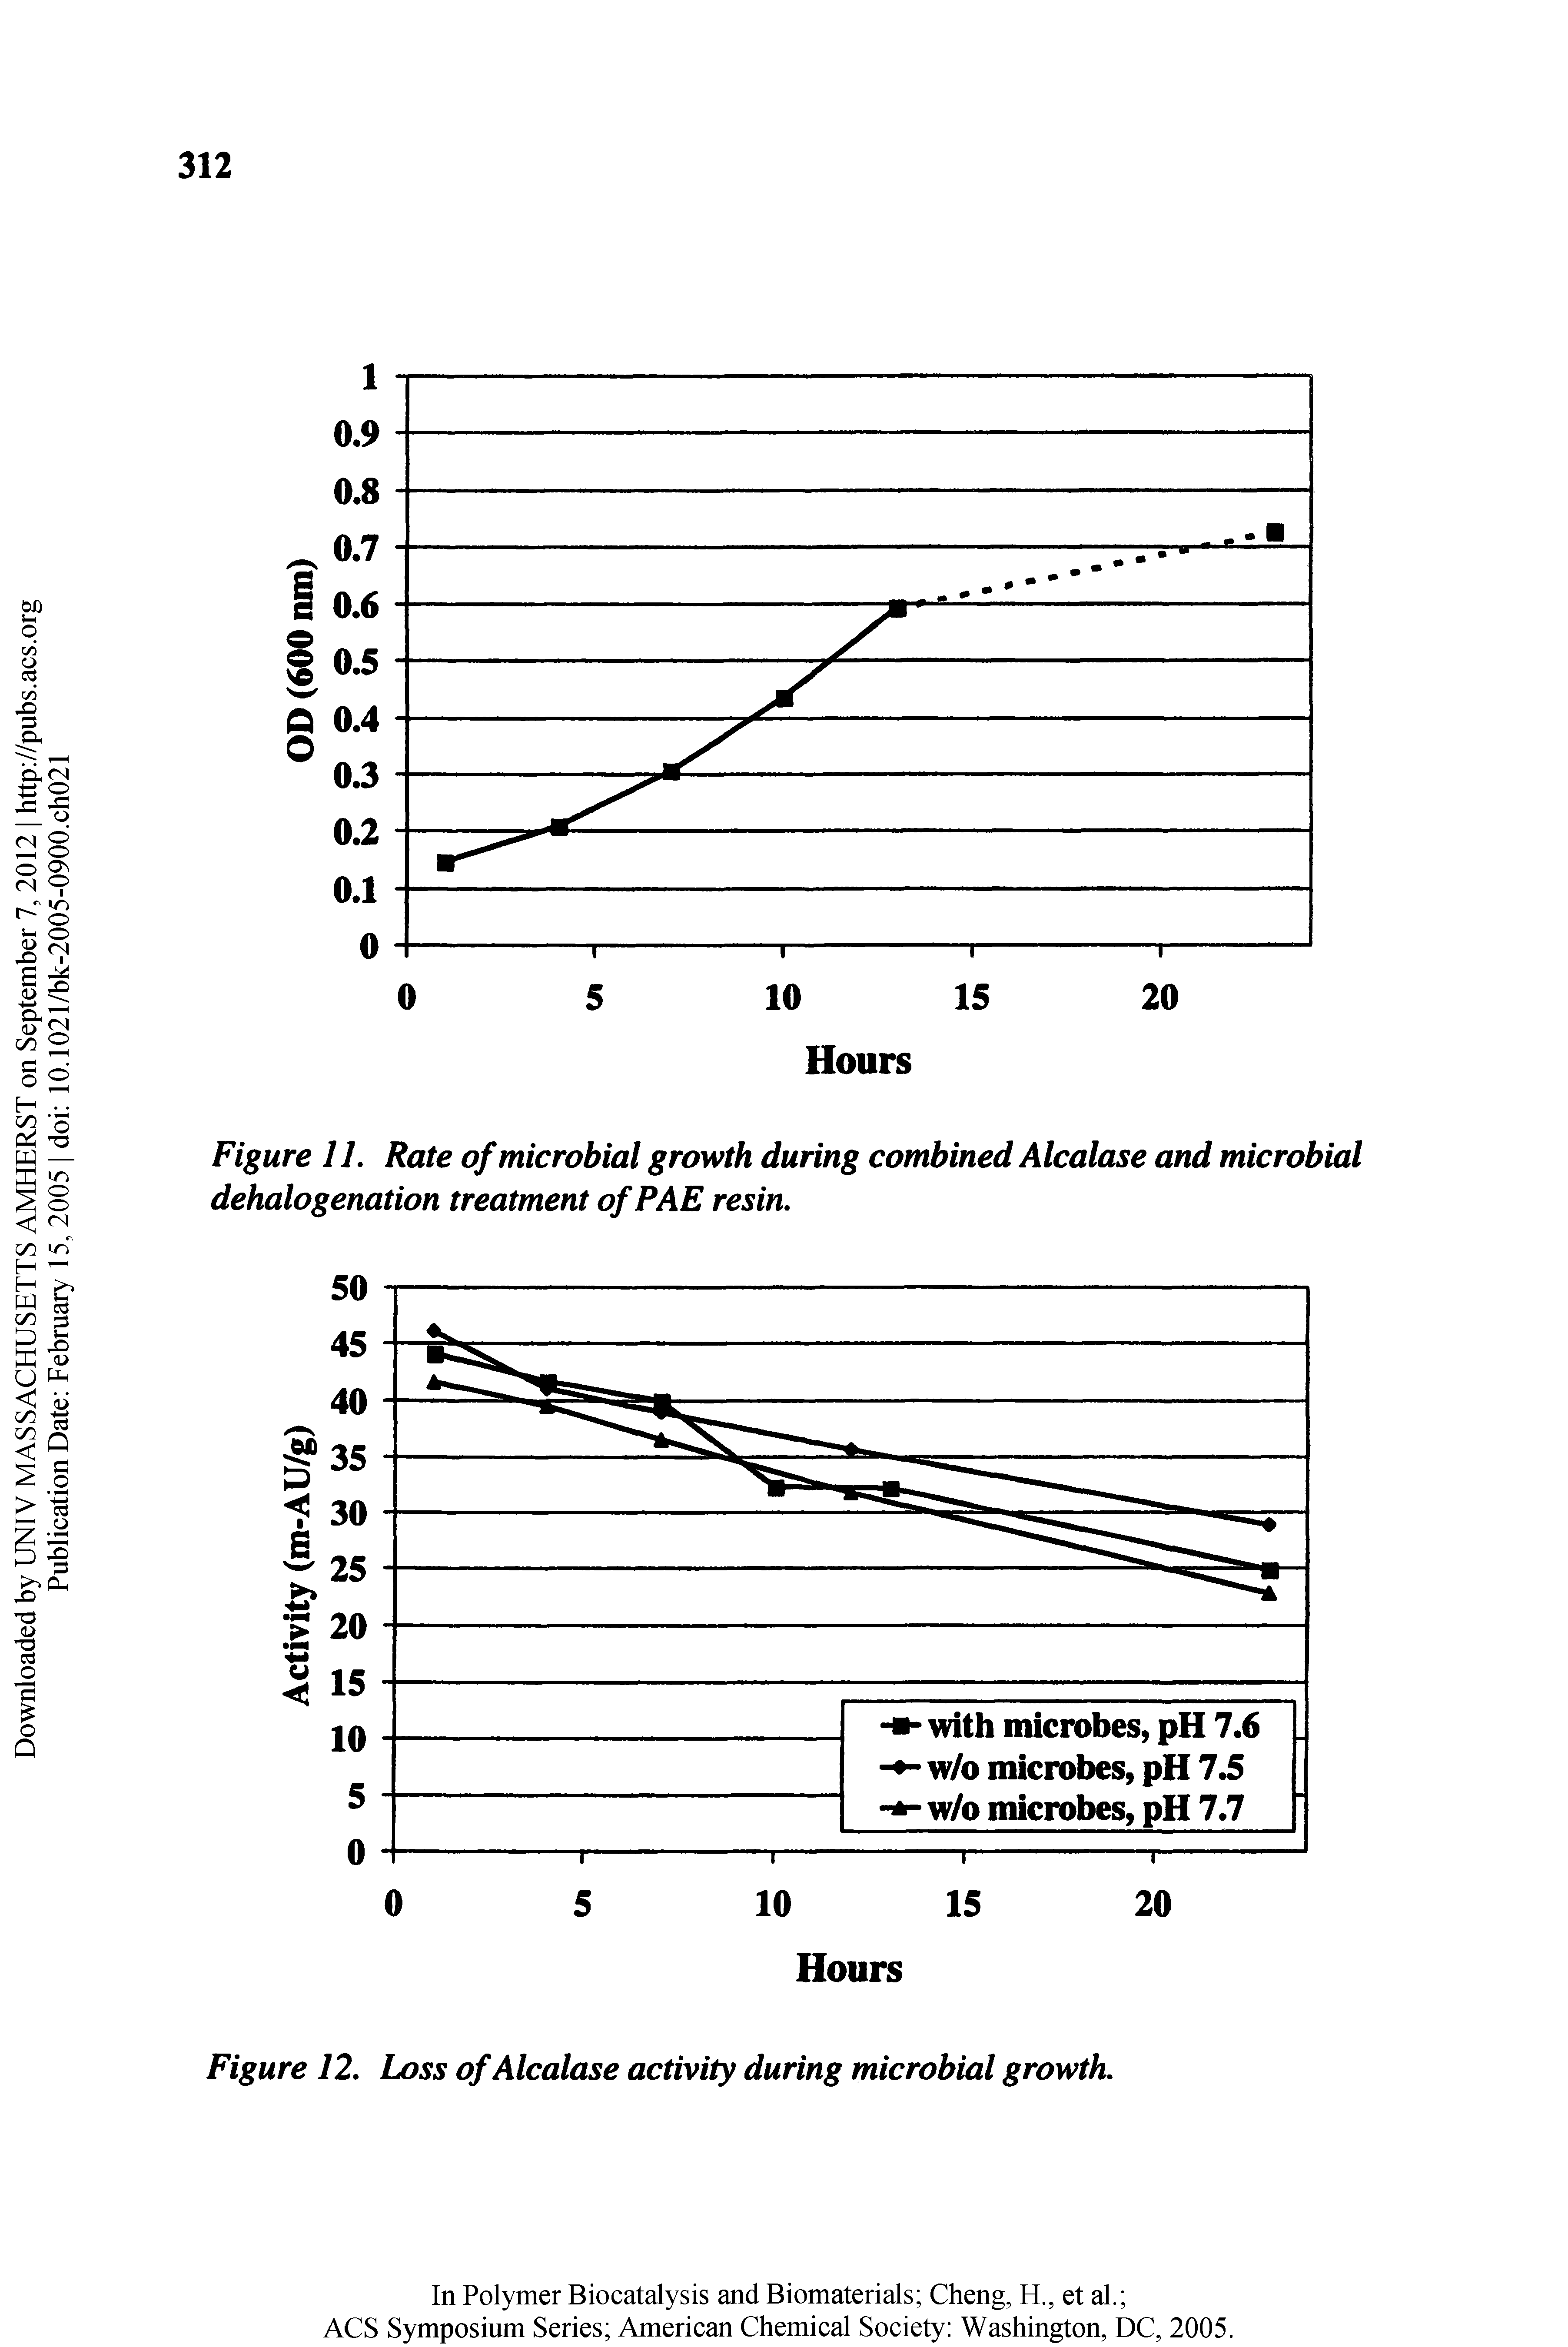 Figure 11. Rate of microbial growth during combined Alcalase and microbial dehalogenation treatment ofPAE resin.